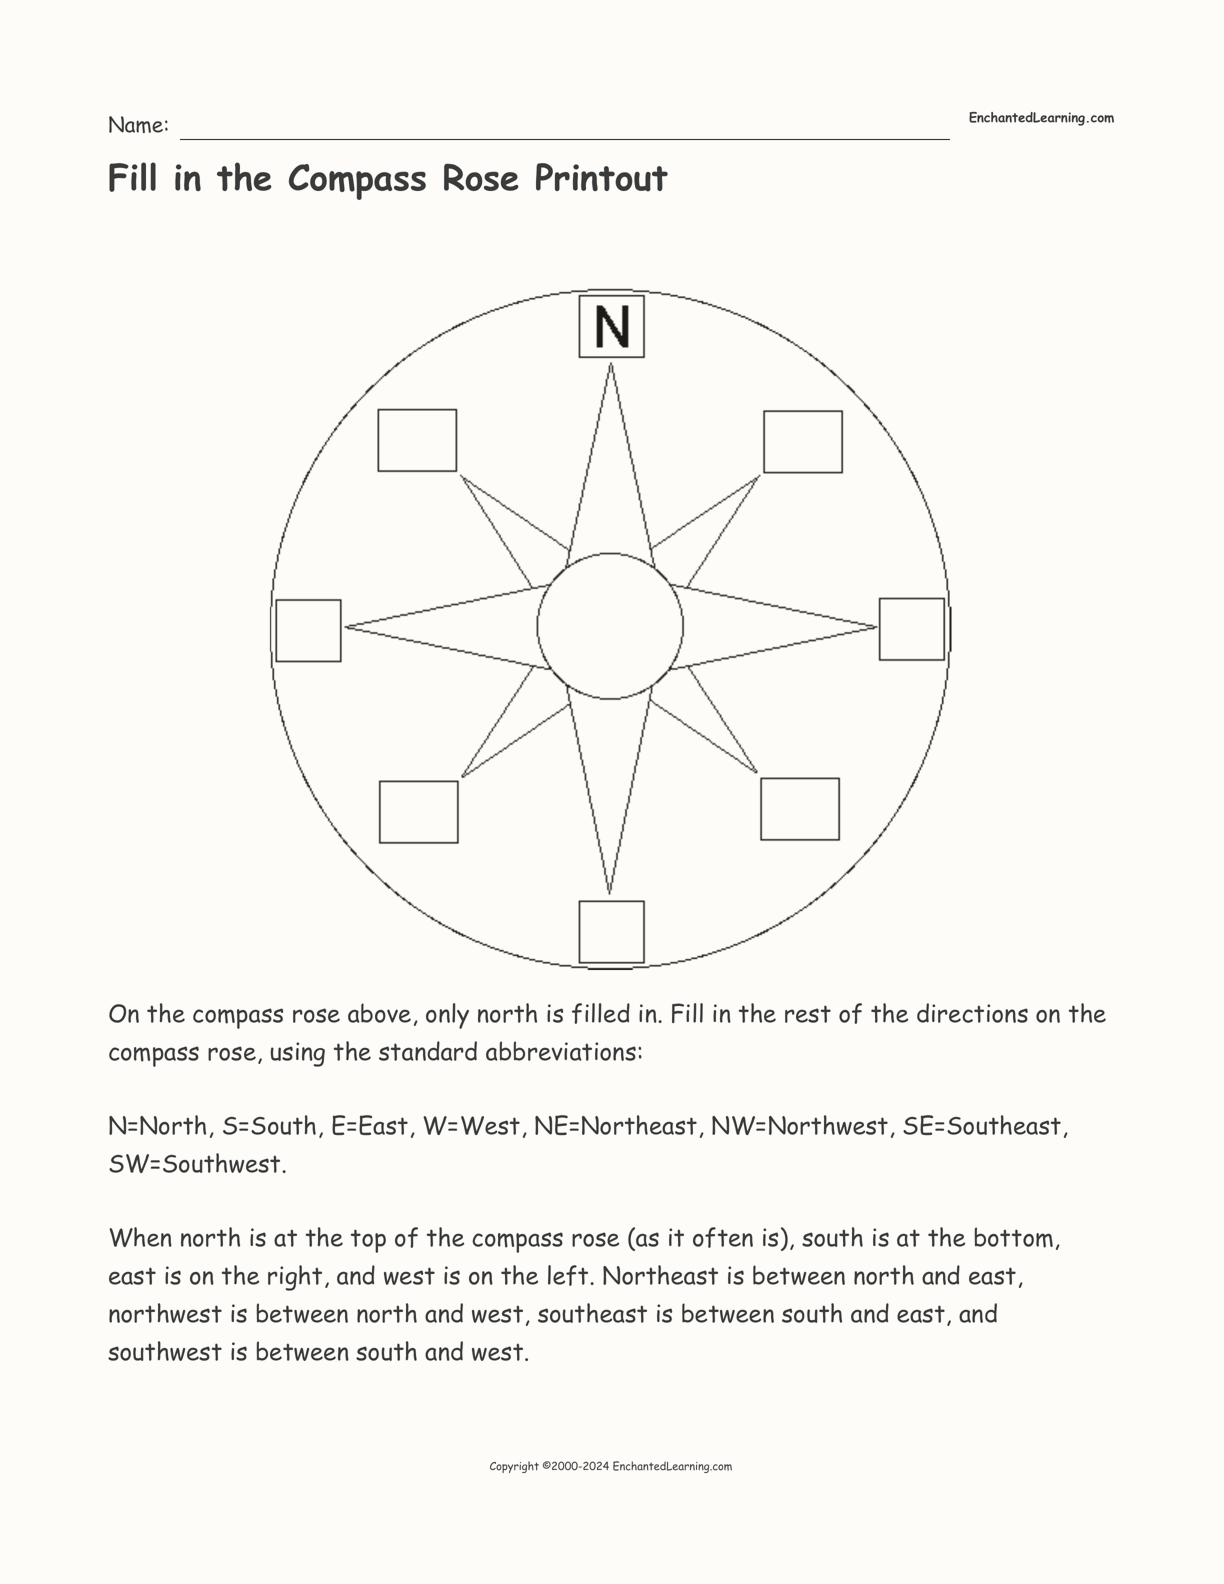 fill-in-the-compass-rose-printout-enchanted-learning